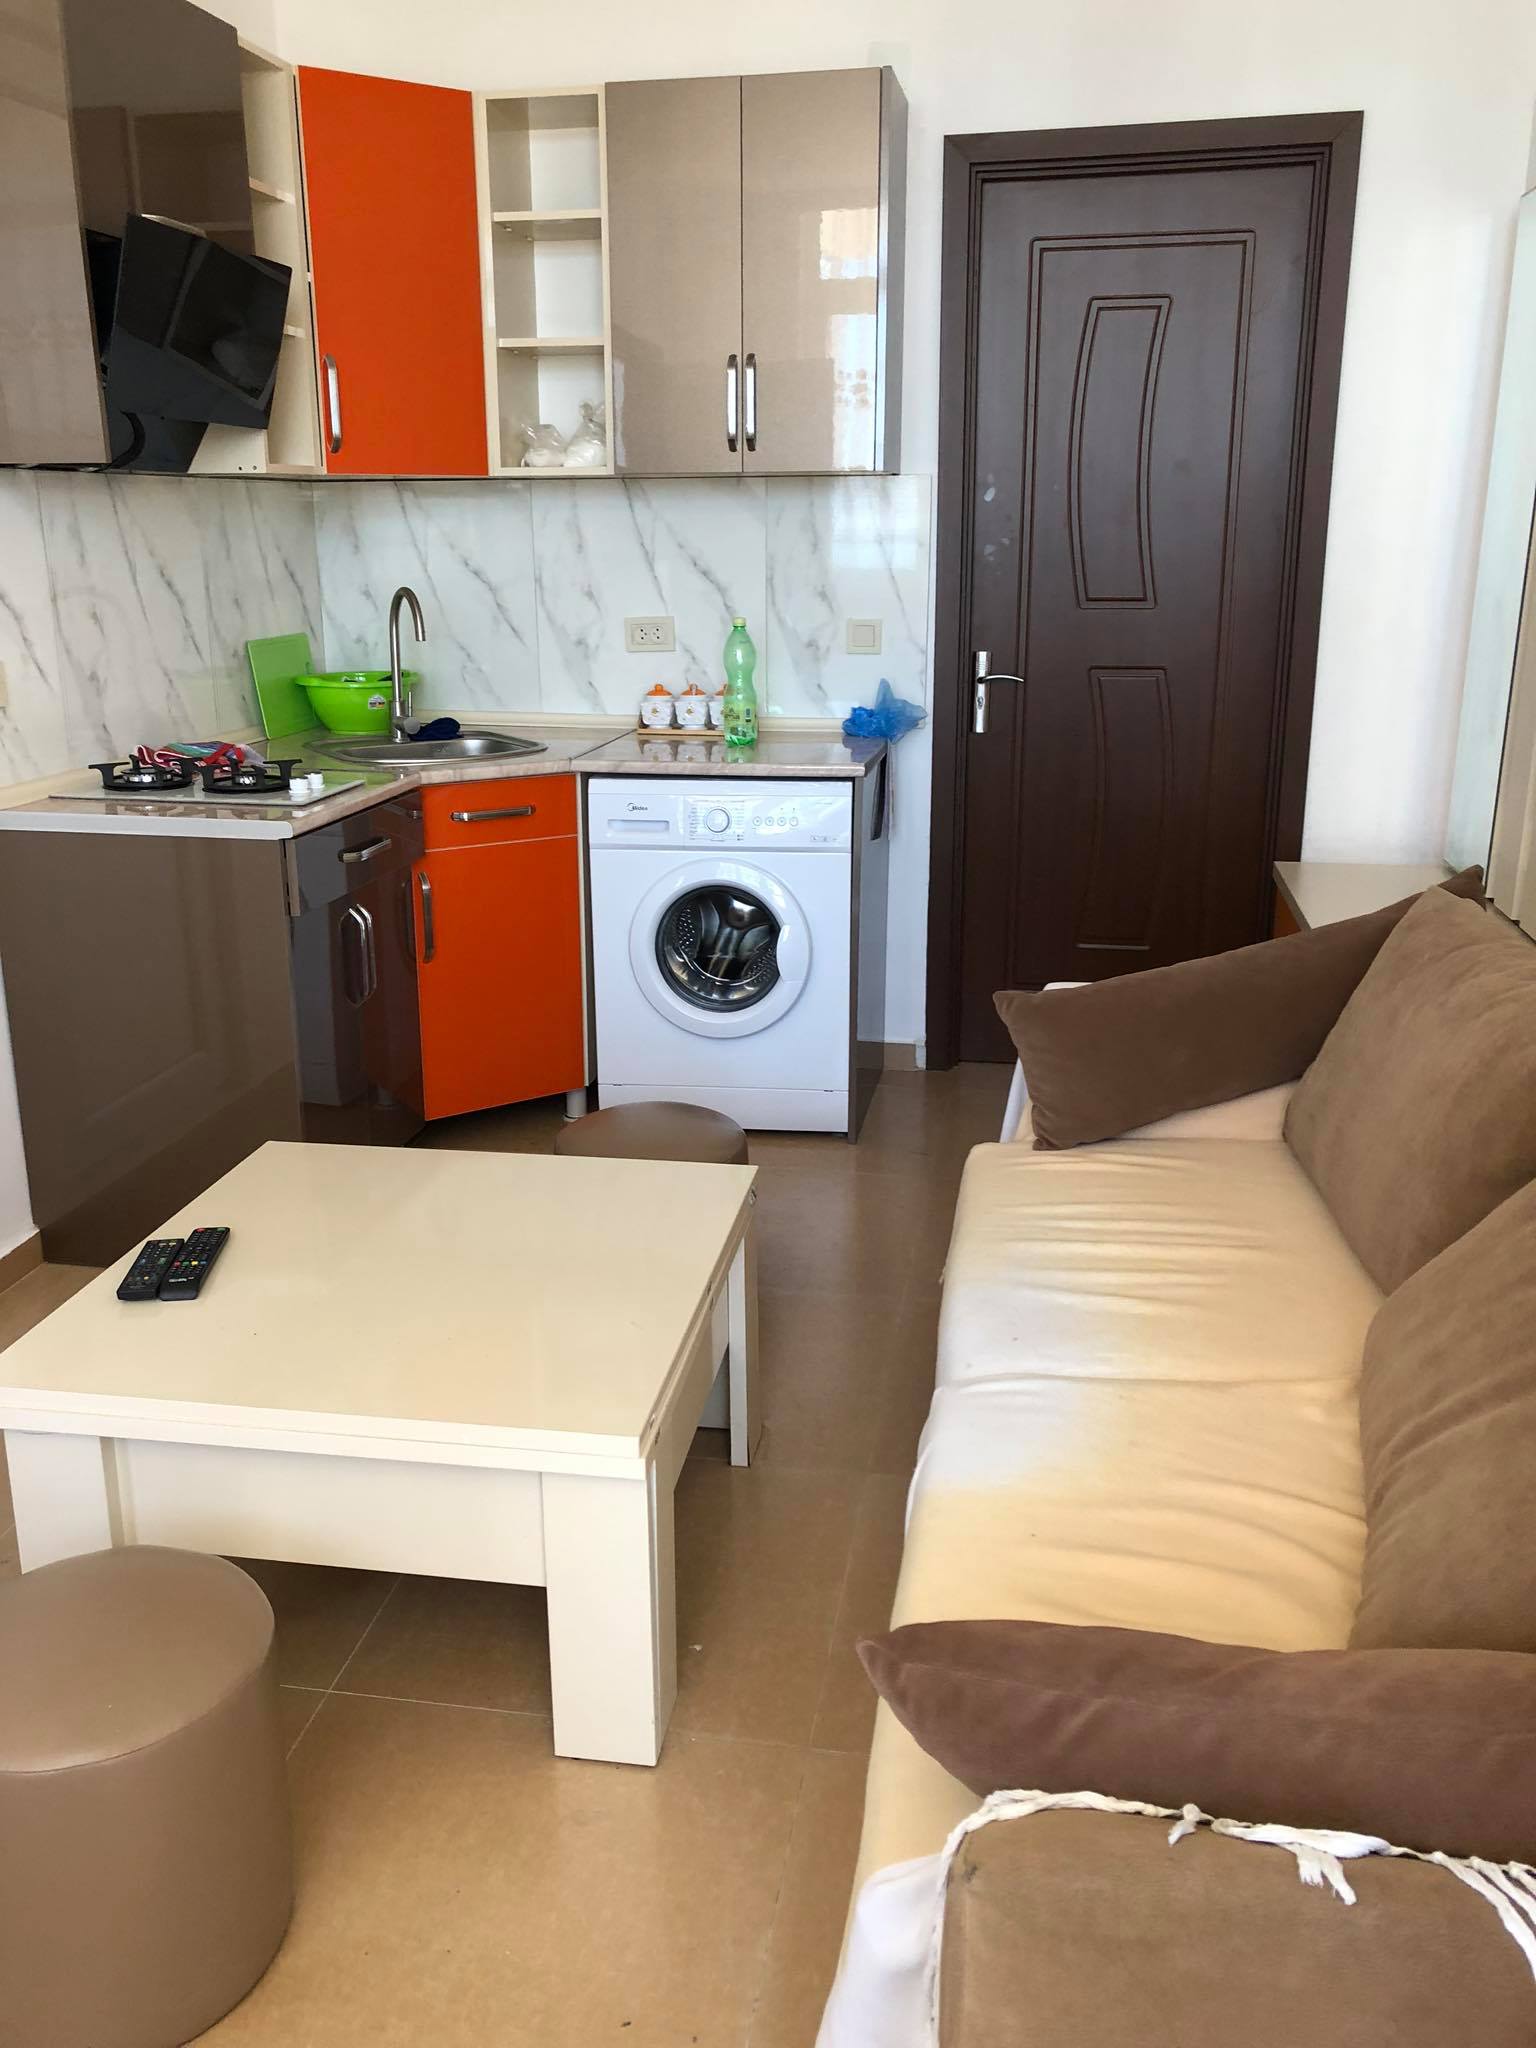 Flat for rent on Inasardize street